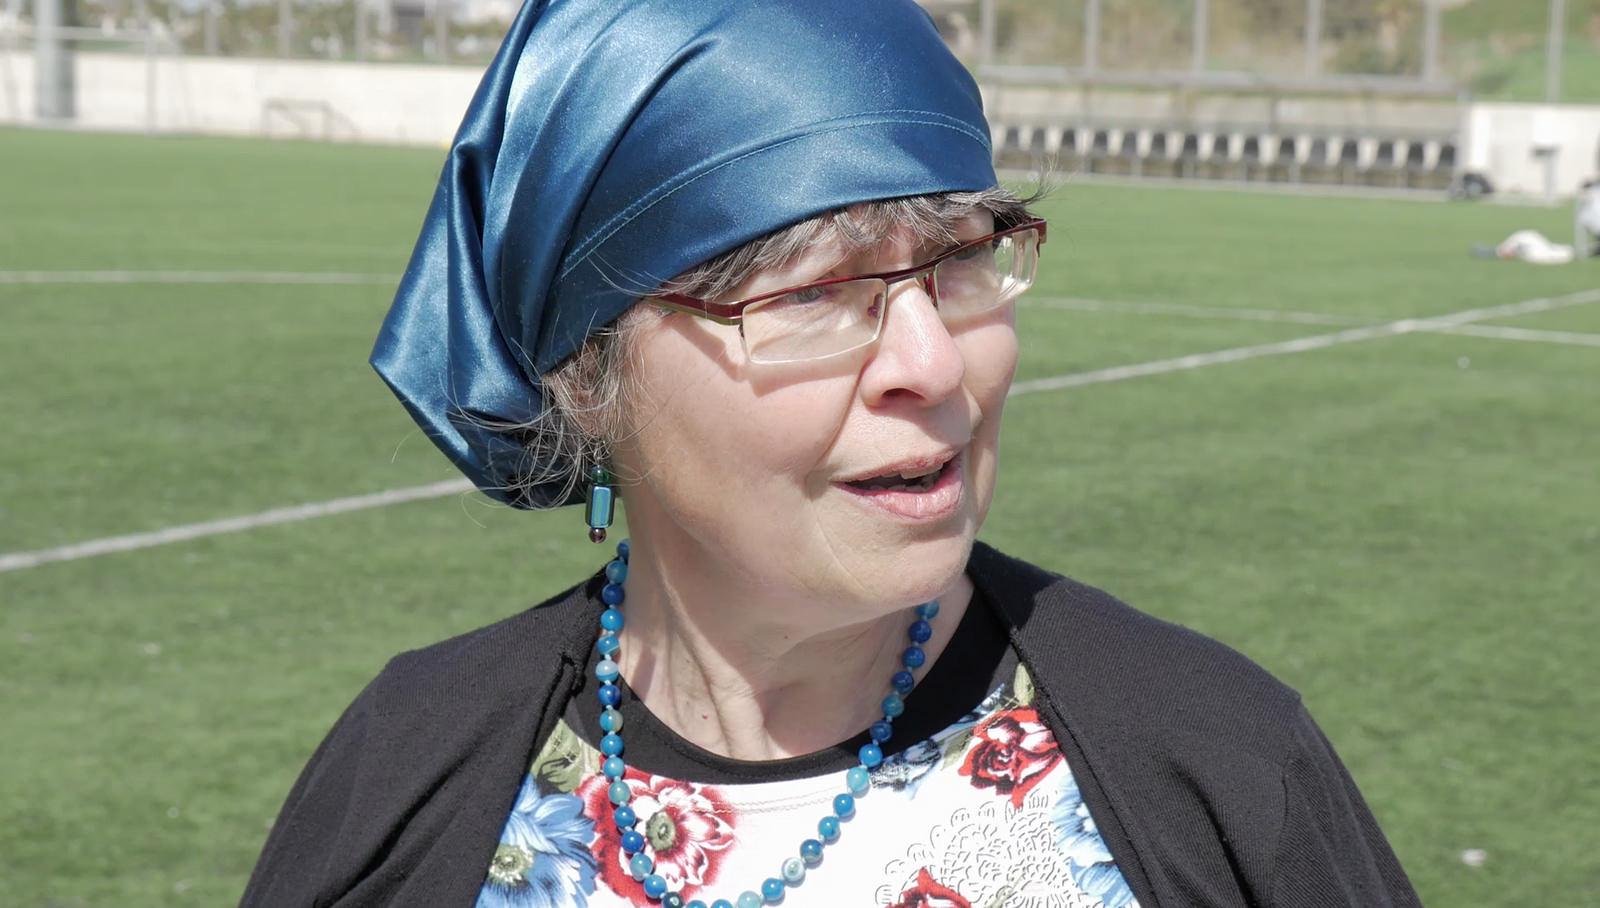 Ruti Eastman talks about how football brings out the mensch in her son. Photo: screenshot